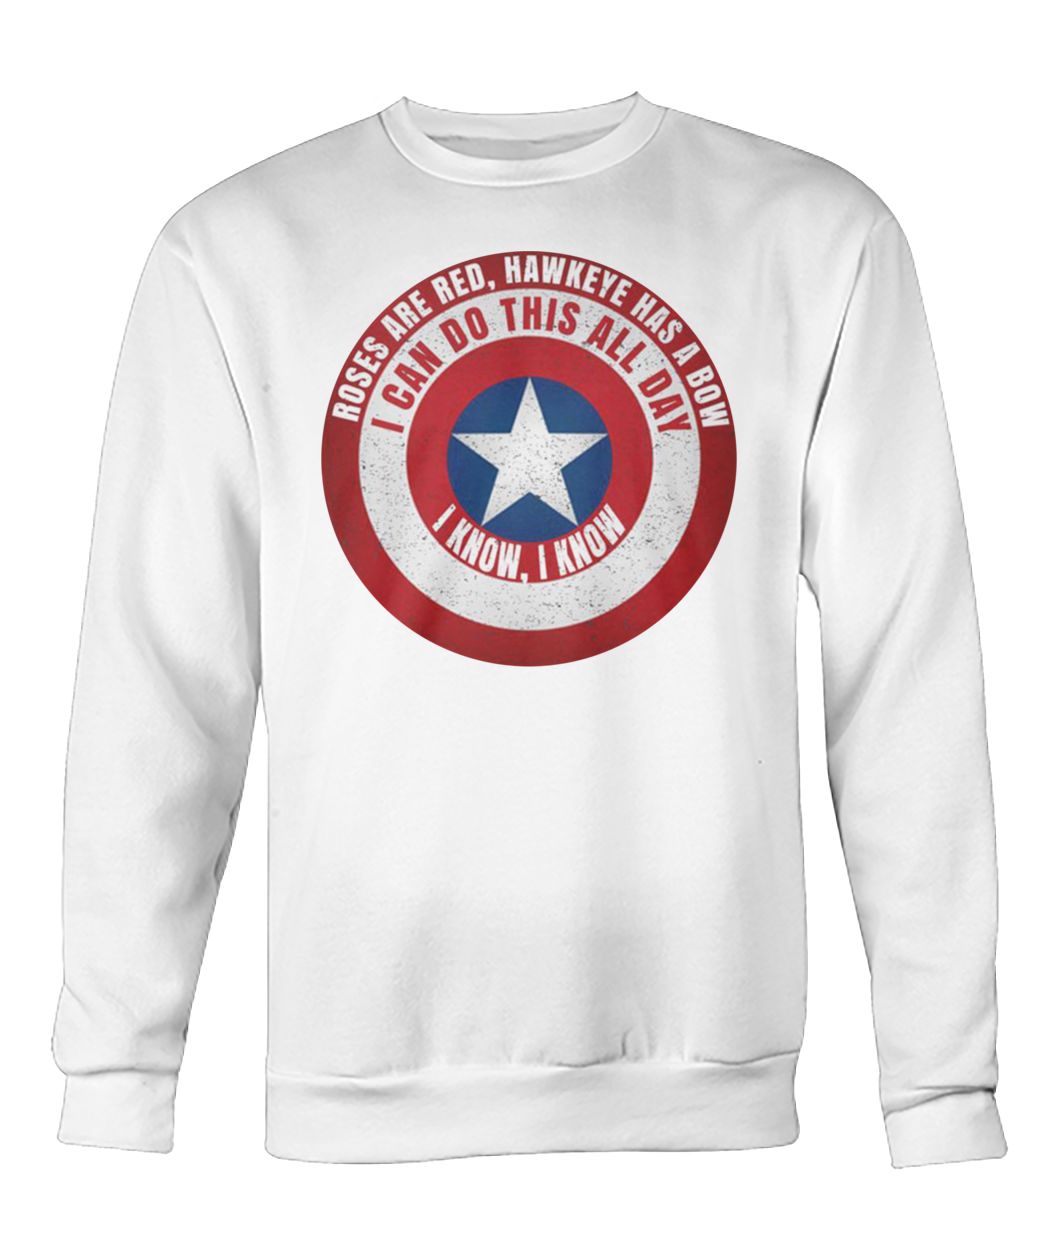 Captain america roses are red hawkeye has a bow I can do this all day I know crew neck sweatshirt